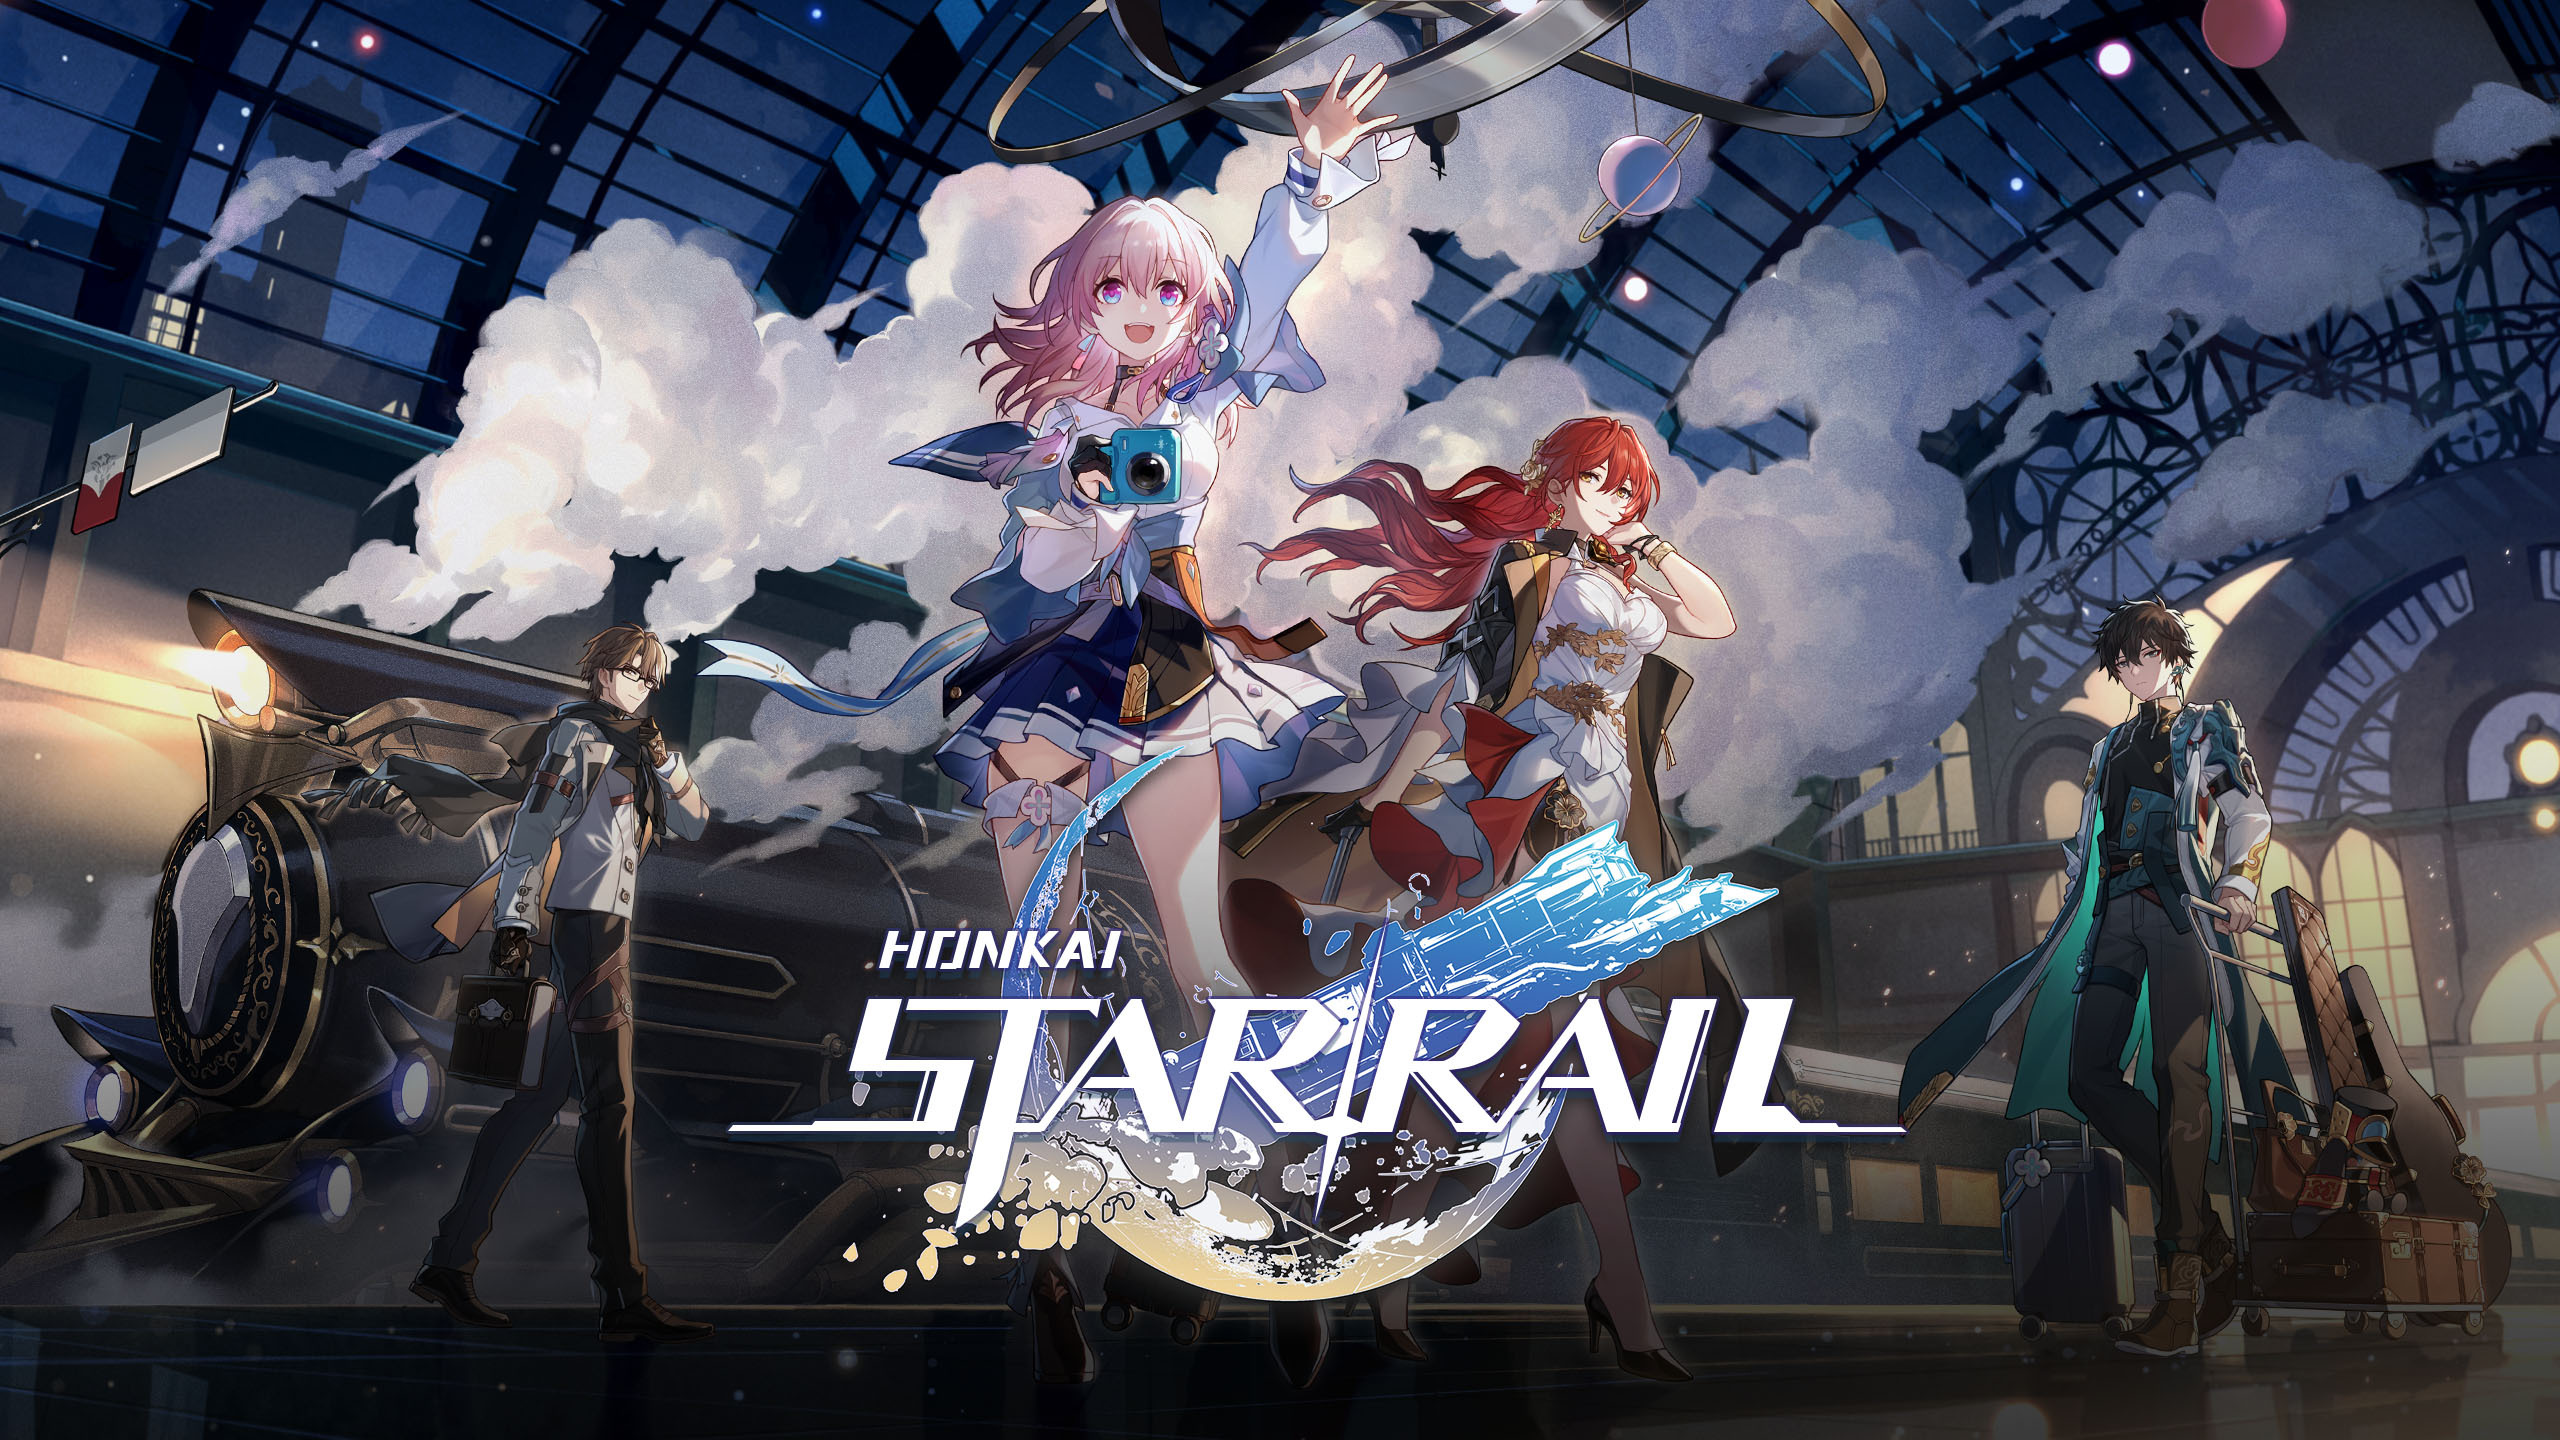 Honkai: Star Rail is an adventure mobile game developed and published by miHoYo, a Chinese company that also created the hit game Genshin Impact.